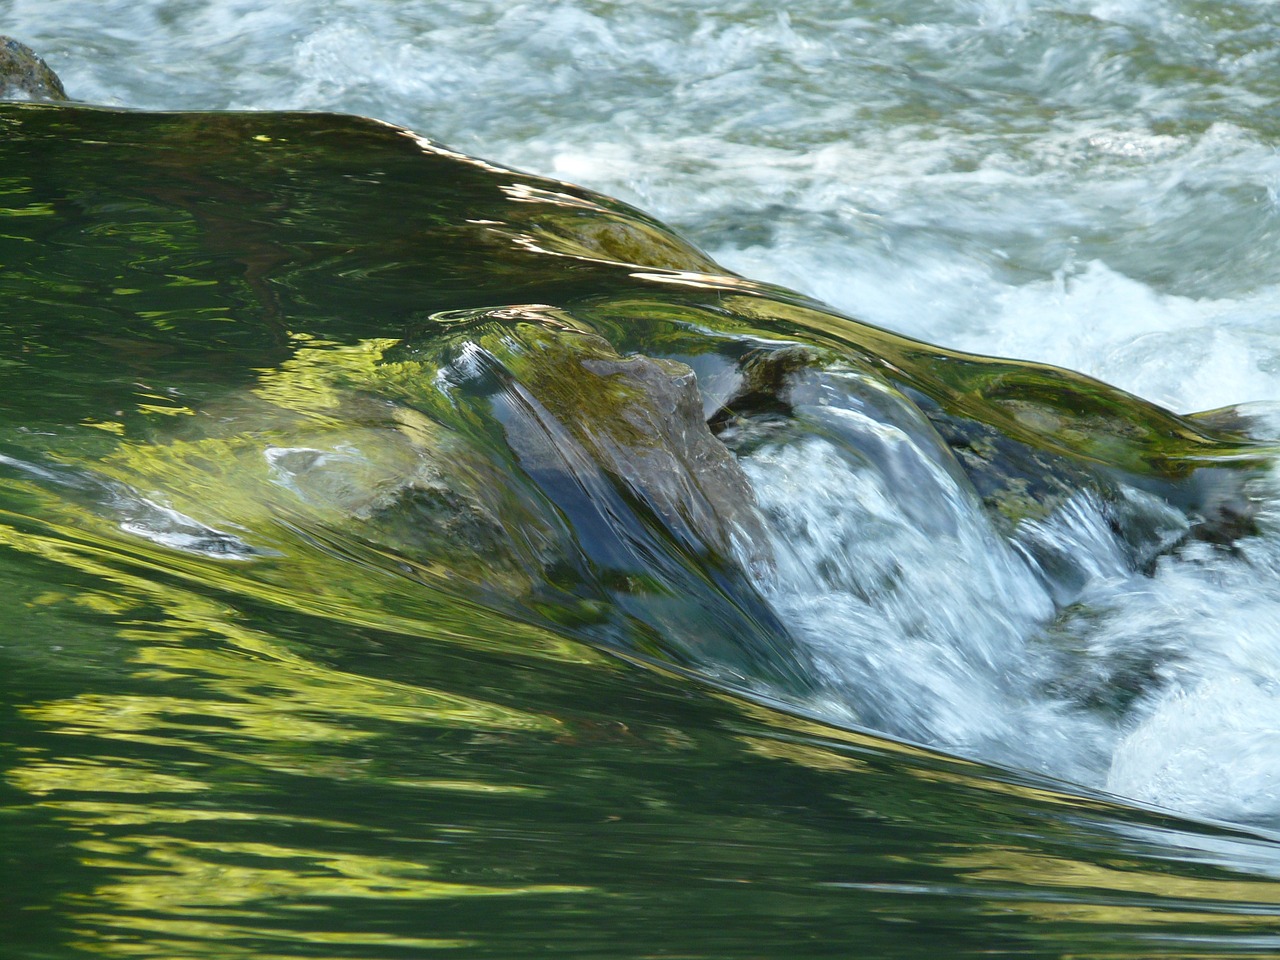 a man riding a wave on top of a surfboard, a picture, by Jan Rustem, flickr, plein air, photo of green river, abstract nature, ! low contrast!, sparkling in the flowing creek